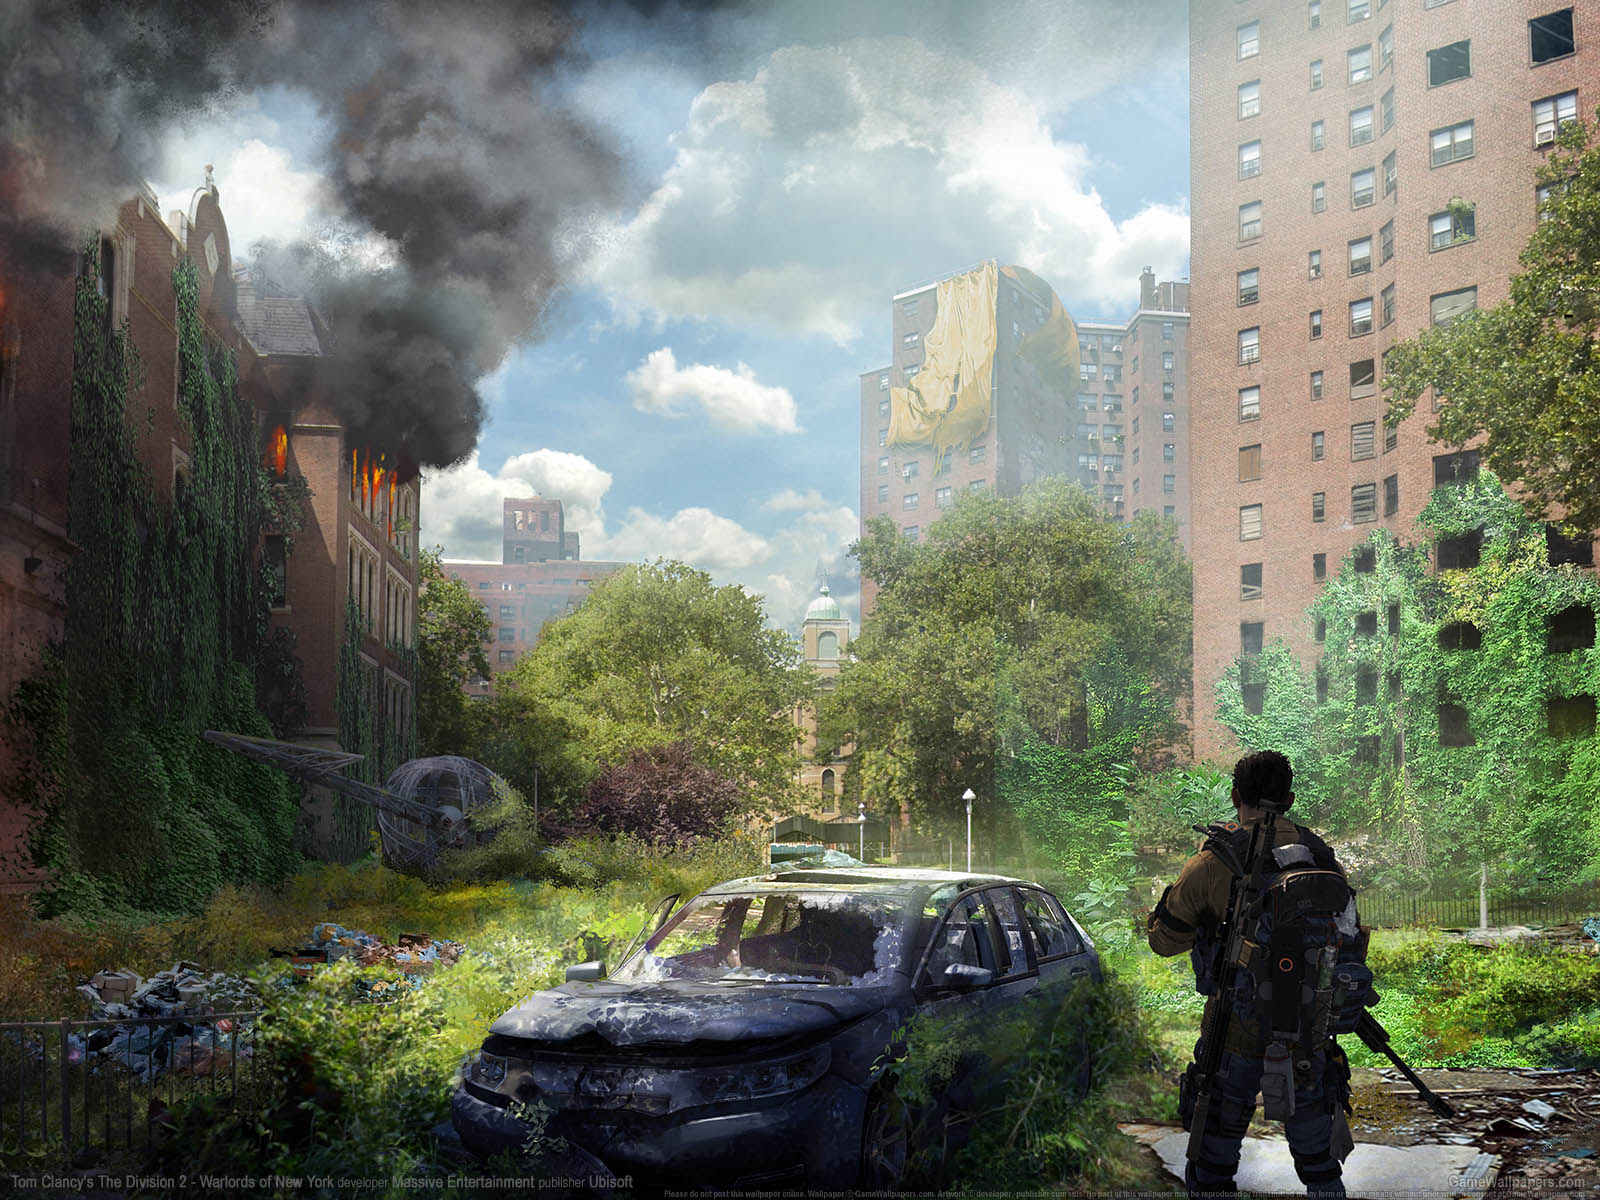 Tom Clancy%255C%2527s The Division 2 - Warlords of New York fond d'cran 03 1600x1200